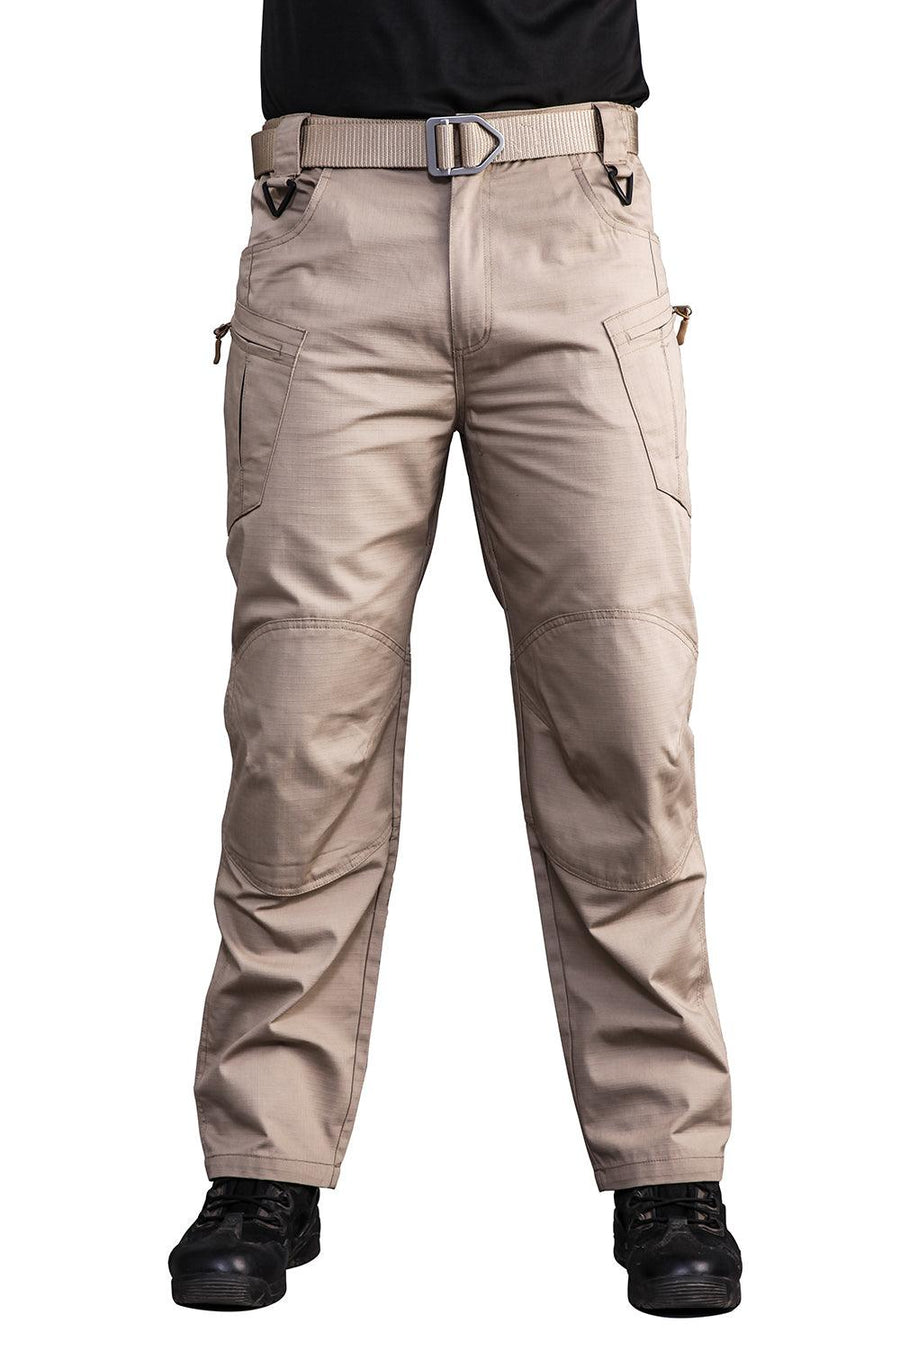 Mens Tactical Pants Lightweight Cargo Pants Military Casual Army Trousers Combat Fishing Travel Hiking - Trendha